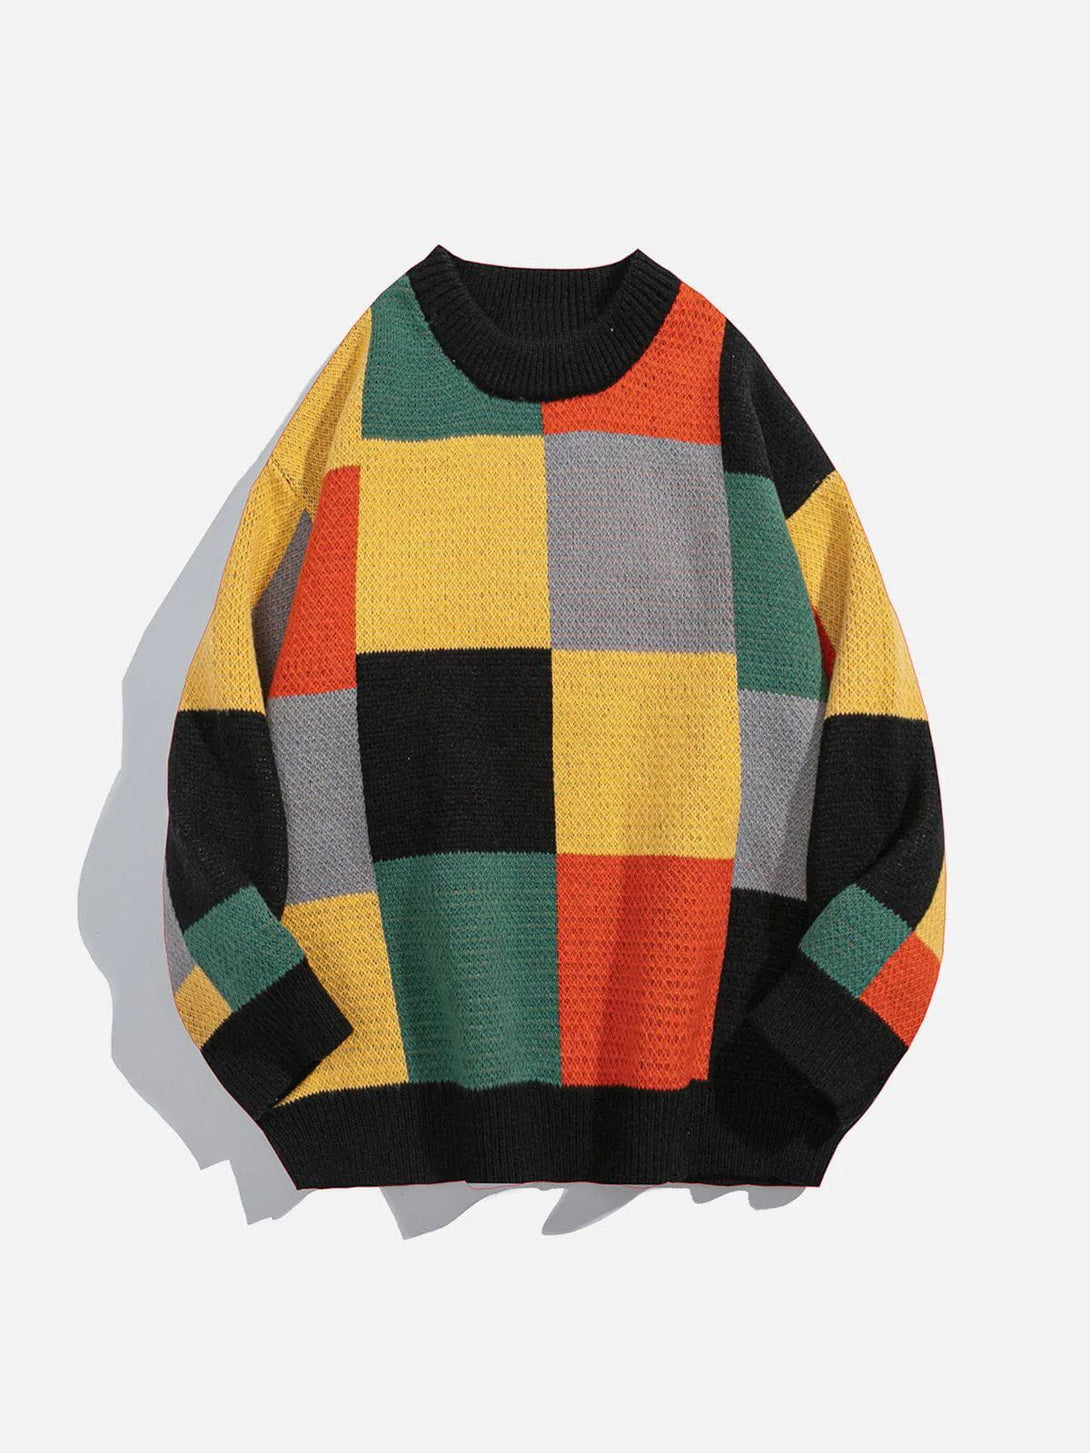 Ellesey - Colorblock Sweater-Streetwear Fashion - ellesey.com